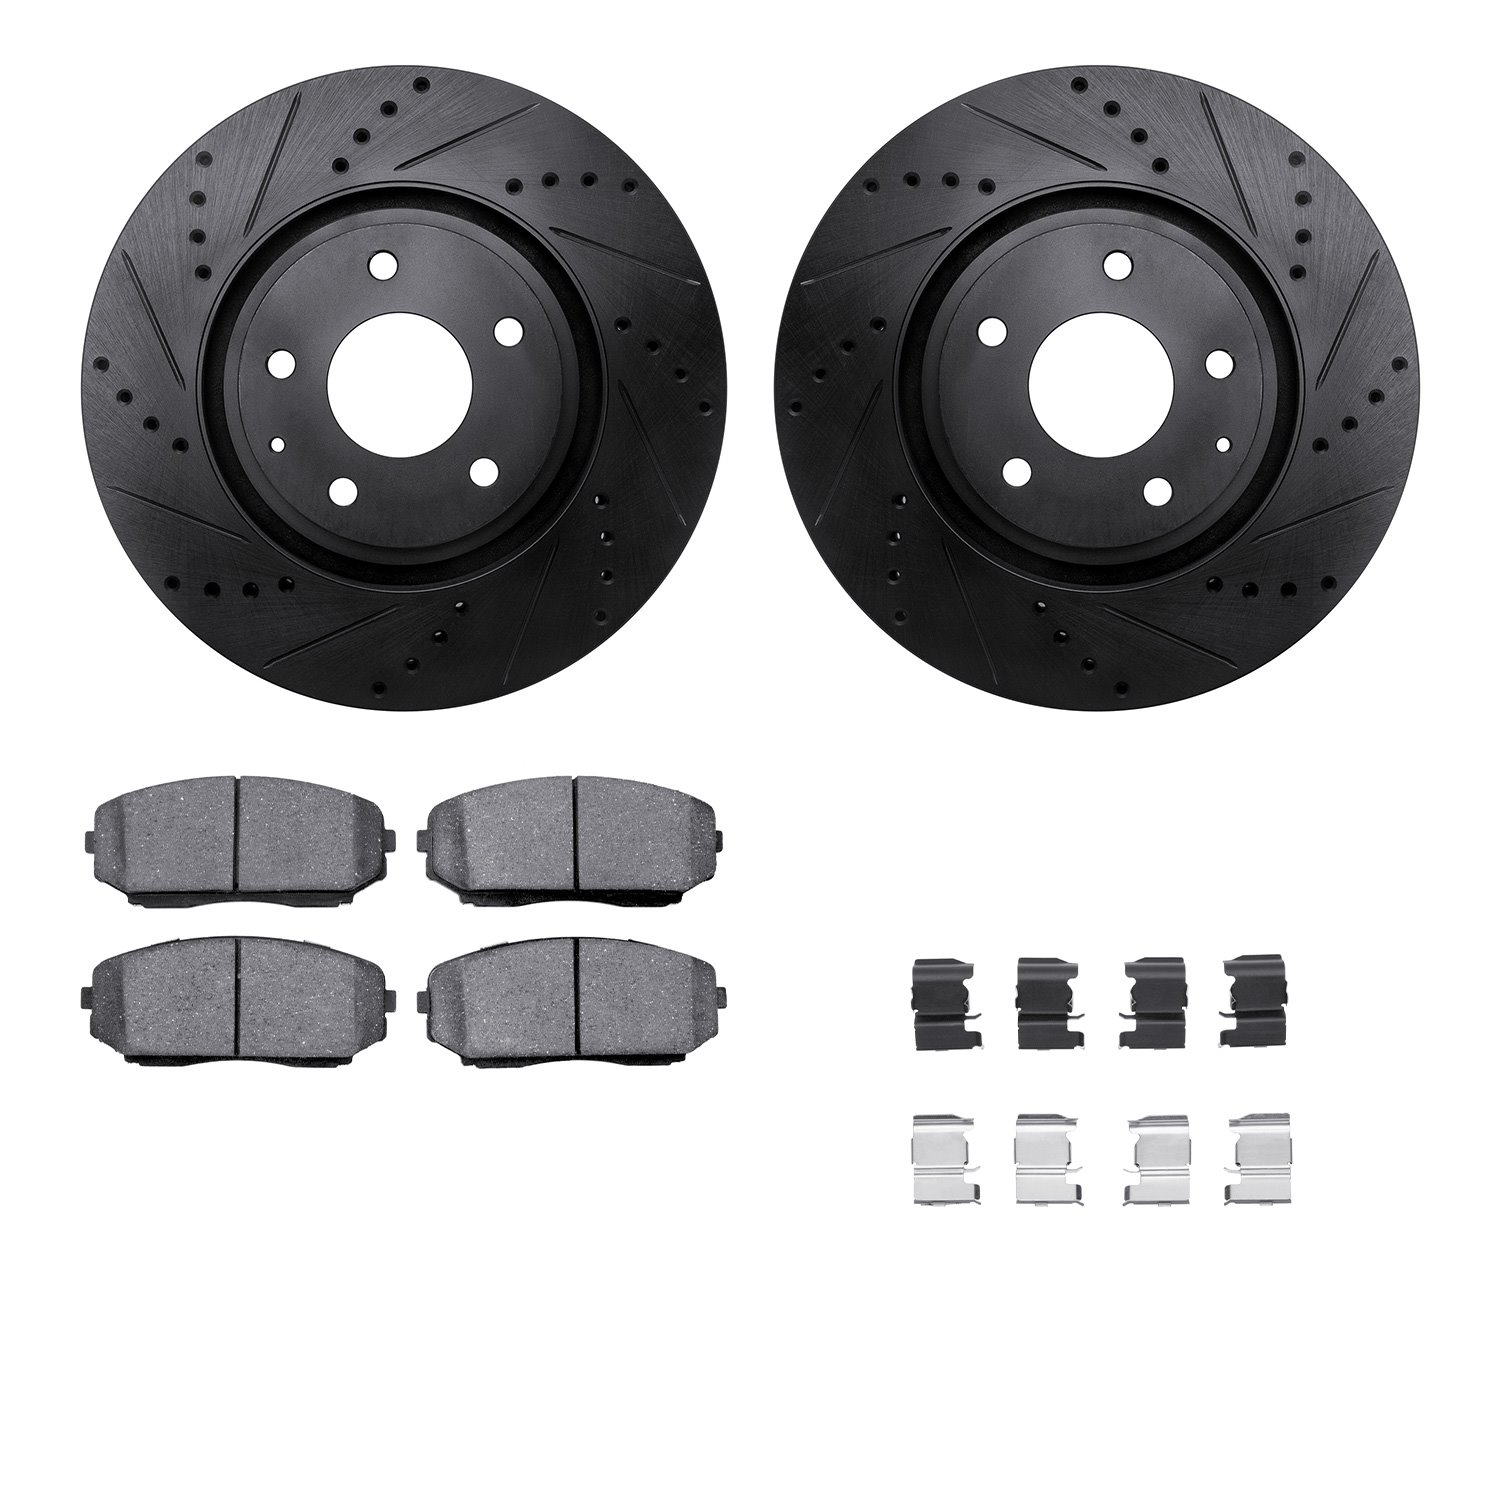 8312-80068 Drilled/Slotted Brake Rotors with 3000-Series Ceramic Brake Pads Kit & Hardware [Black], Fits Select Ford/Lincoln/Mer